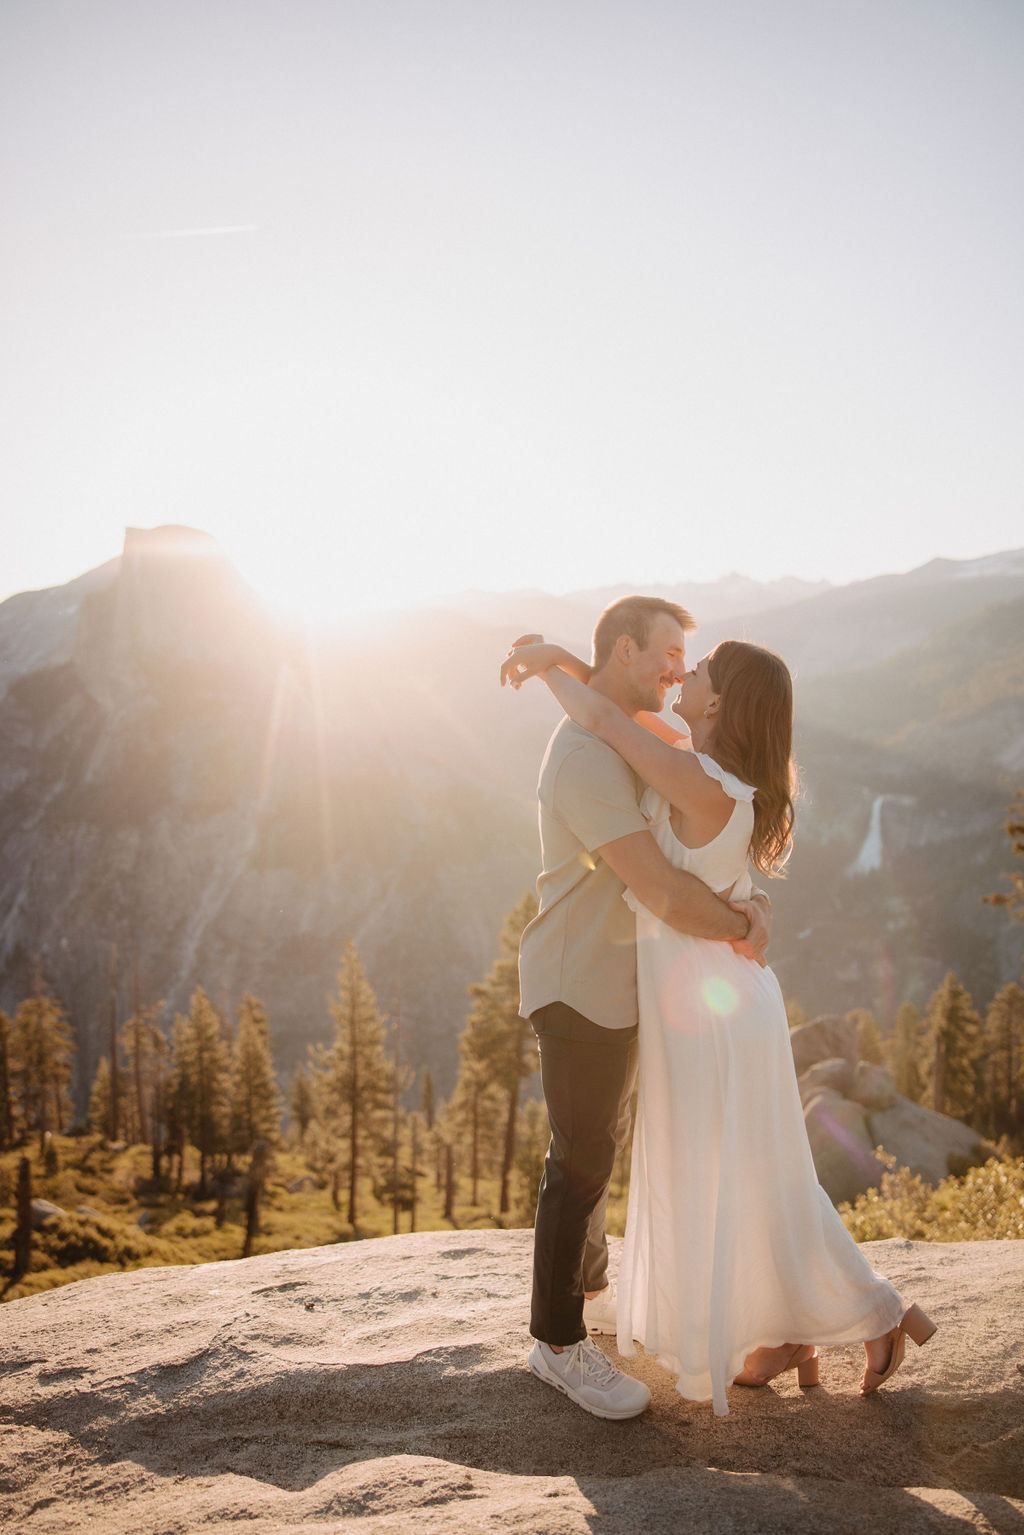 A man lifts a woman in a white dress as they embrace against a backdrop of a mountainous landscape with a setting sun during their glacier point engagement photos